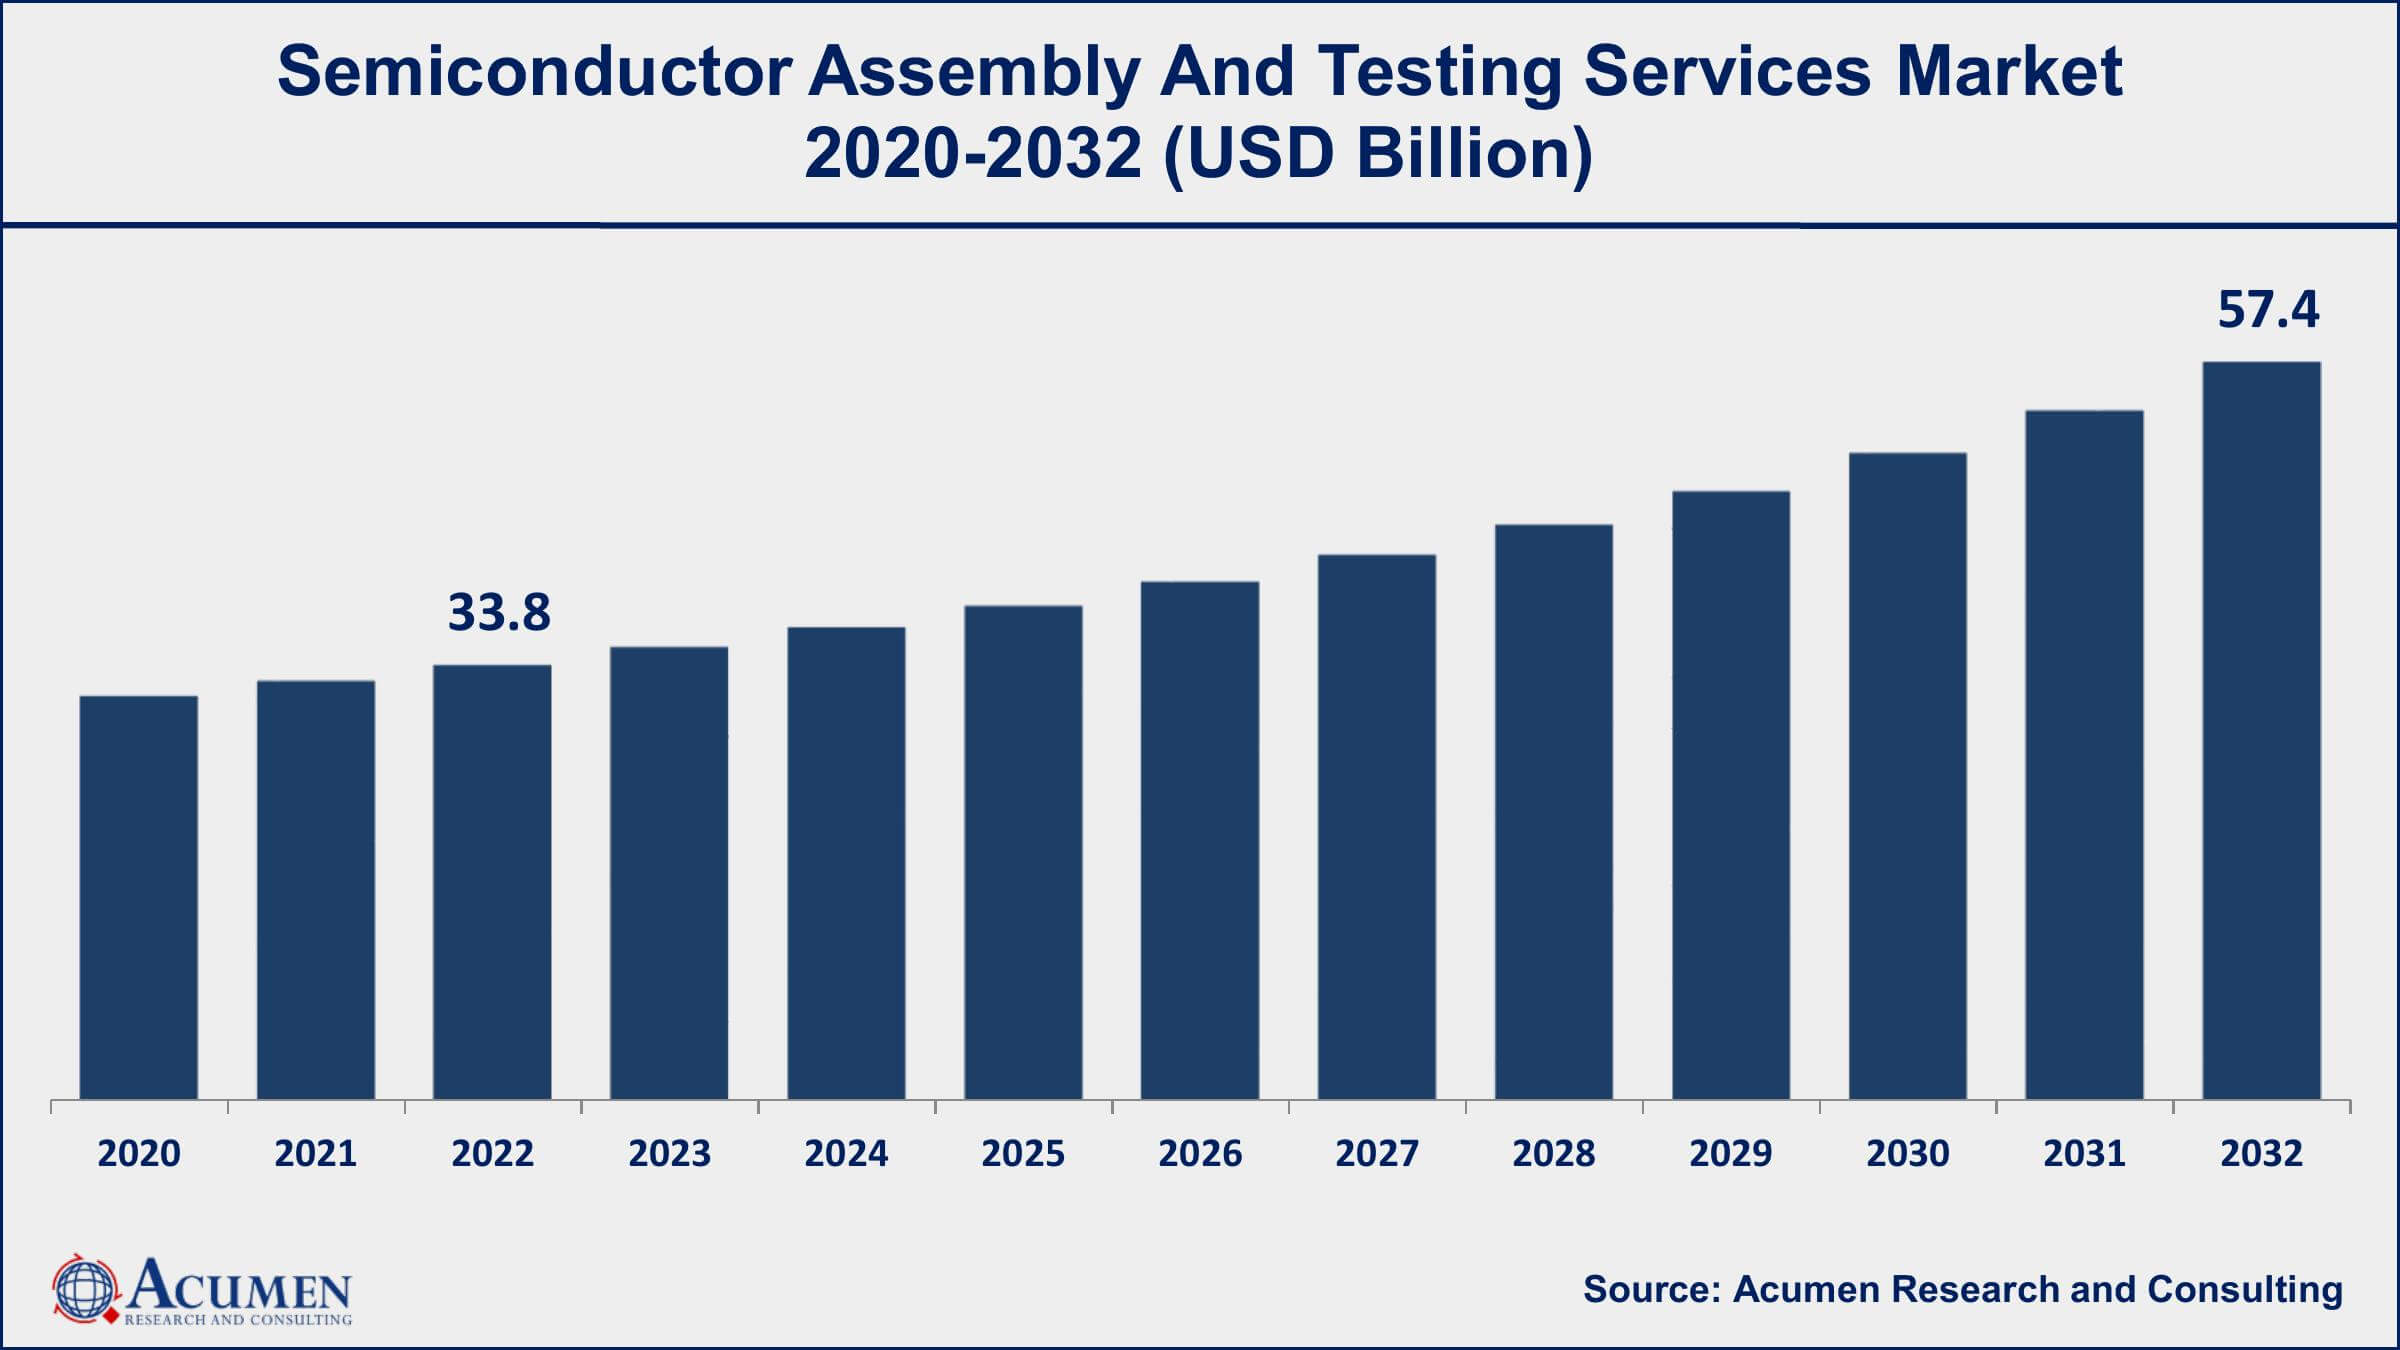 Semiconductor Assembly and Testing Services Market Dynamics